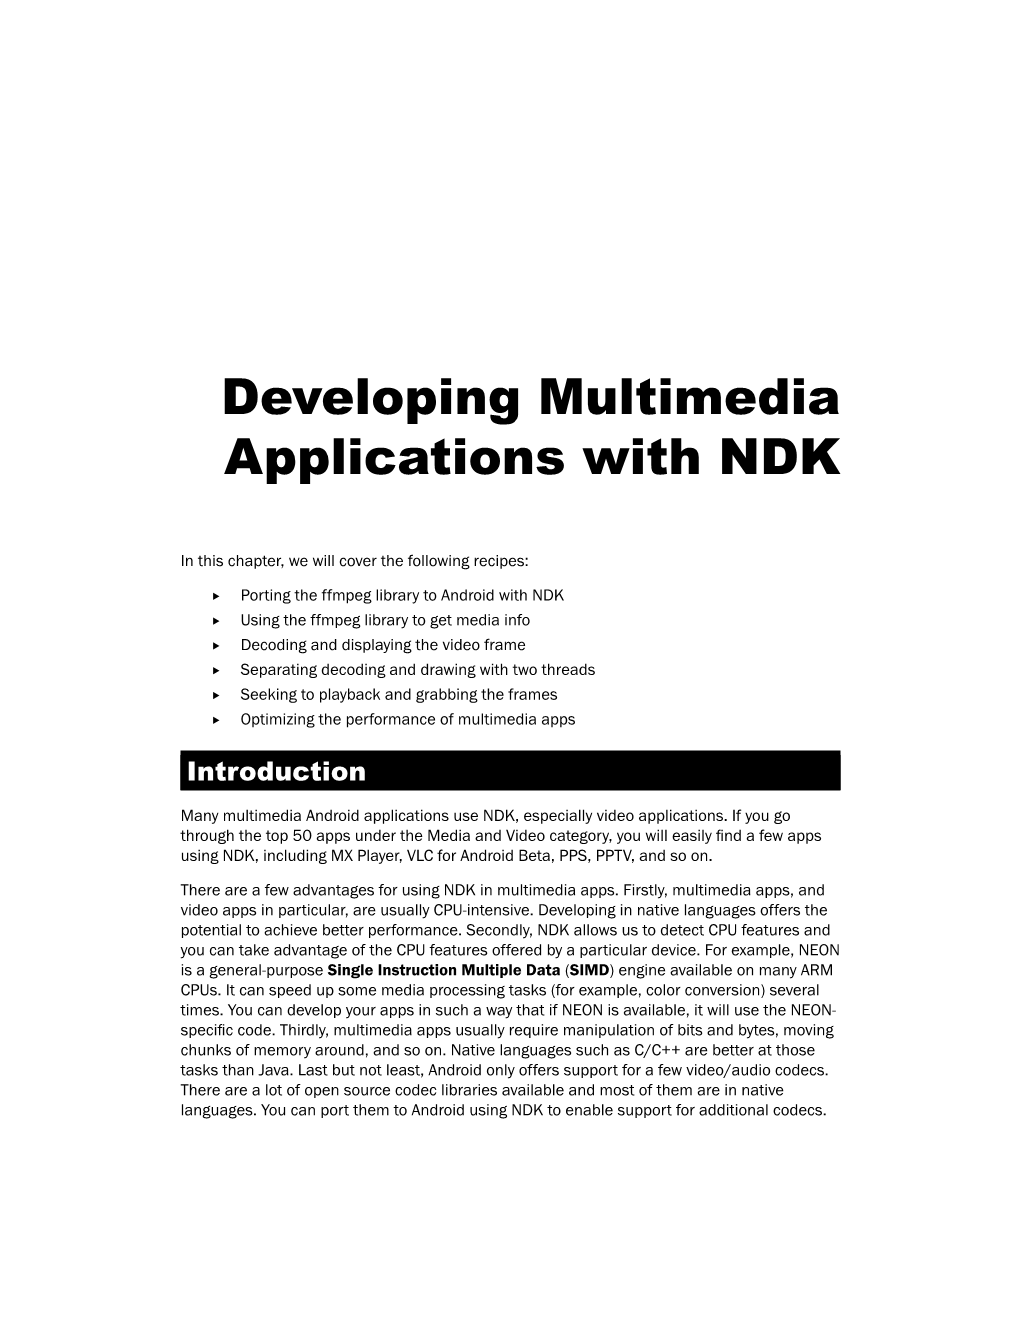 Developing Multimedia Applications with NDK